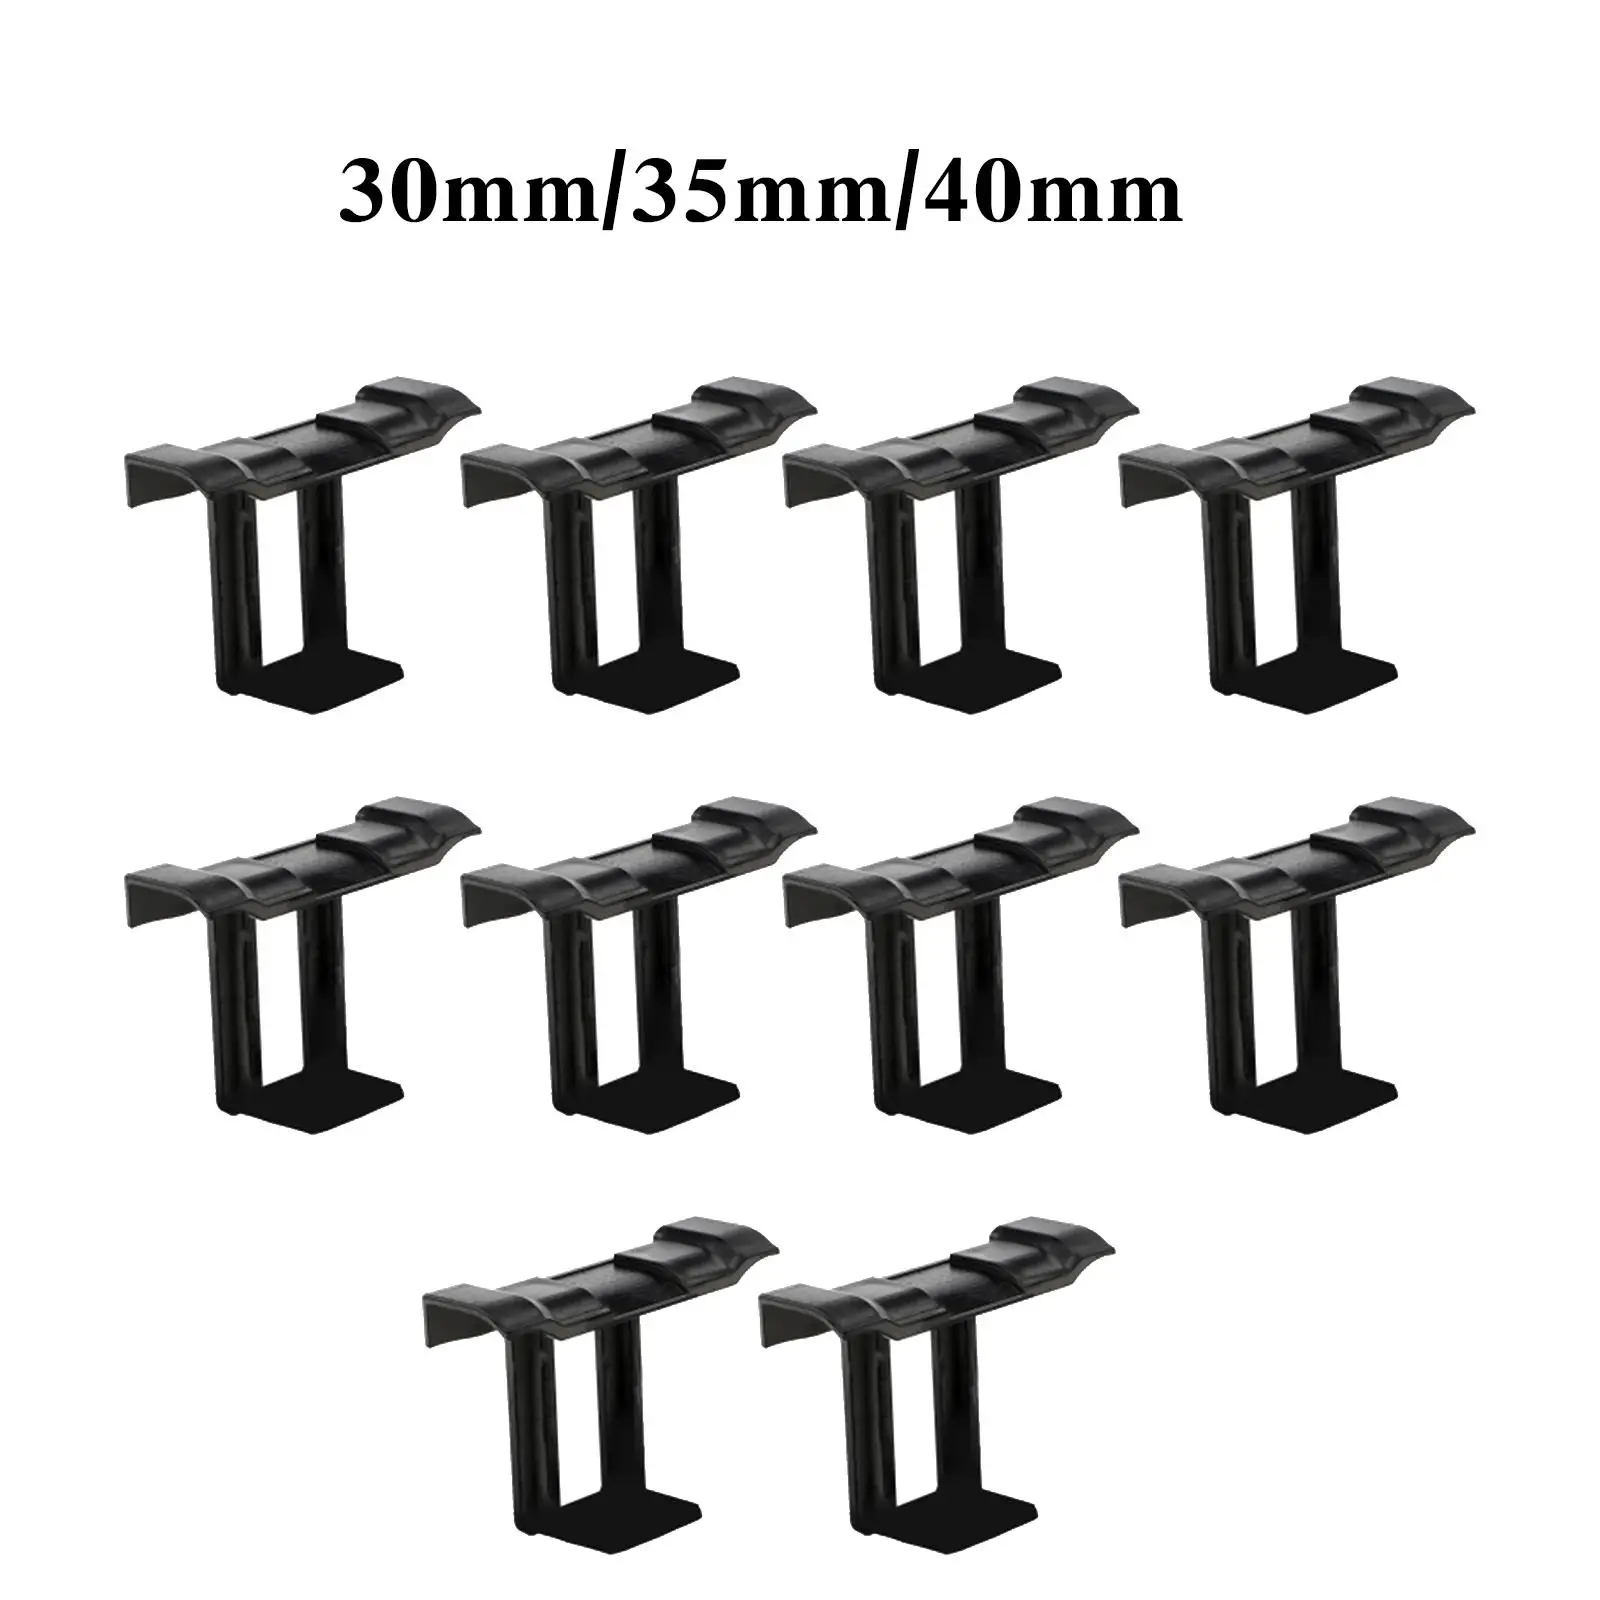 10 Pieces Water Drain Clips Auto Remove Stagnant Water Dust Pv Modules Cleaning Clips for Photovoltaic Panel Water Drain